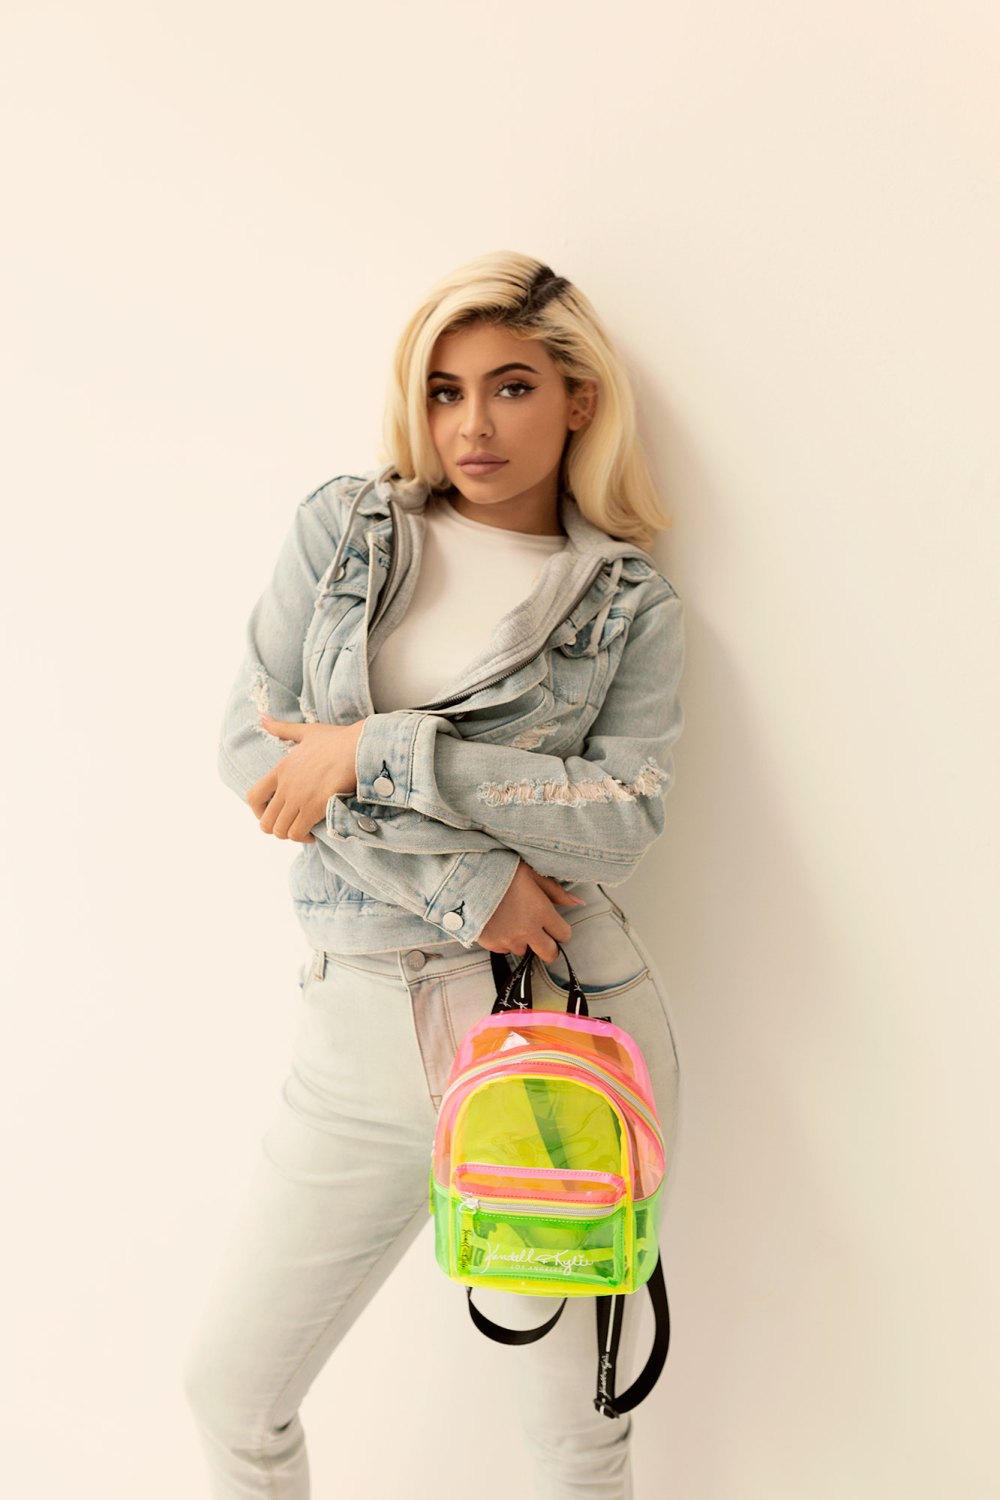 Shop Our Favorite Backpack From the Kendall + Kylie Collection